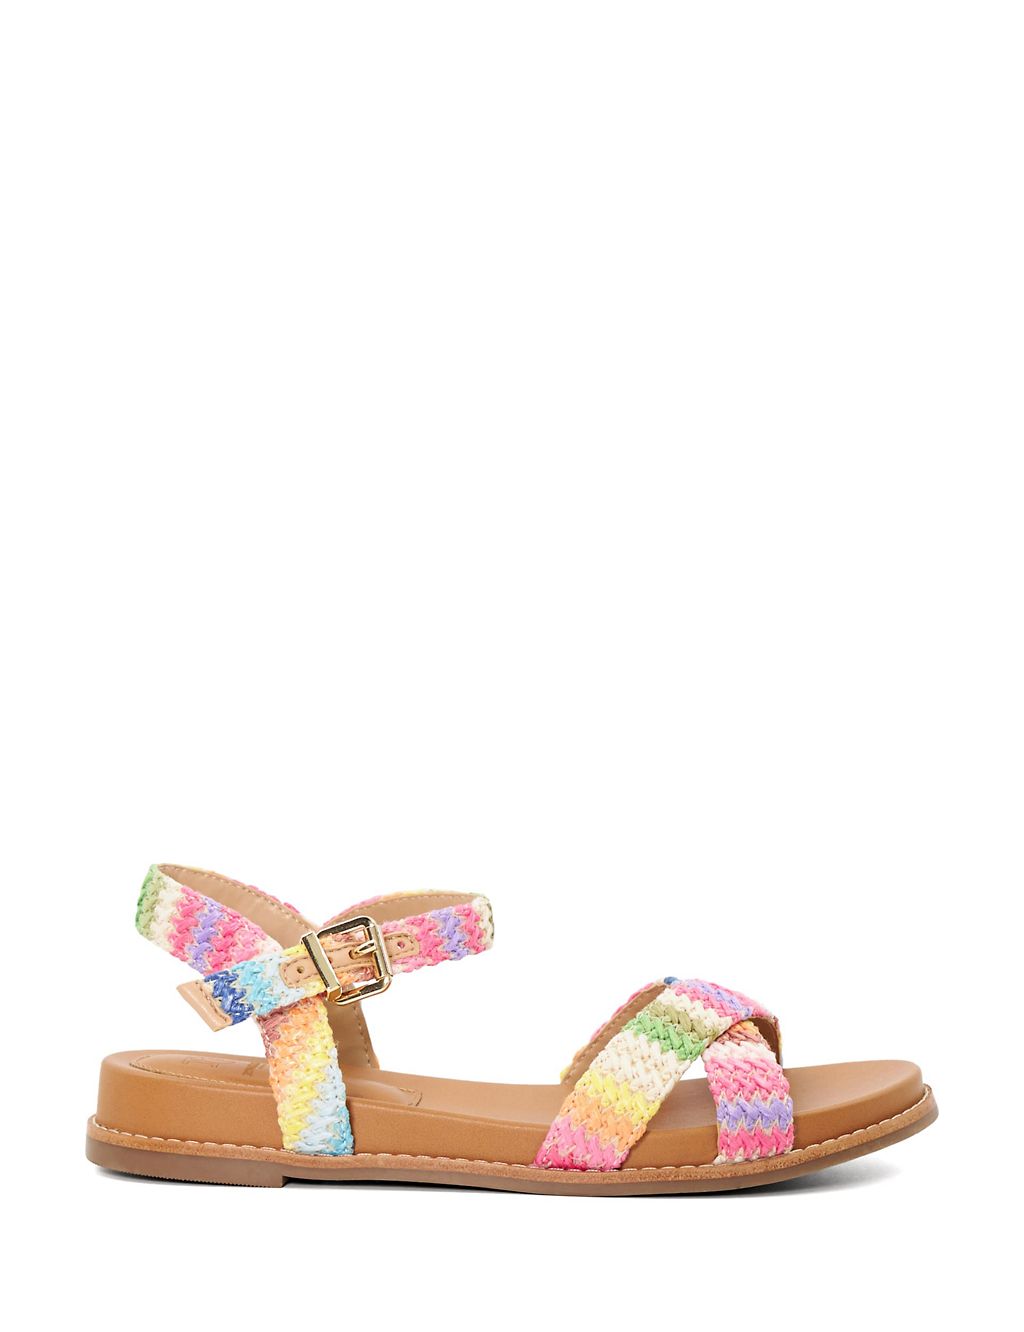 Woven Crossover Ankle Strap Flat Sandals 3 of 5